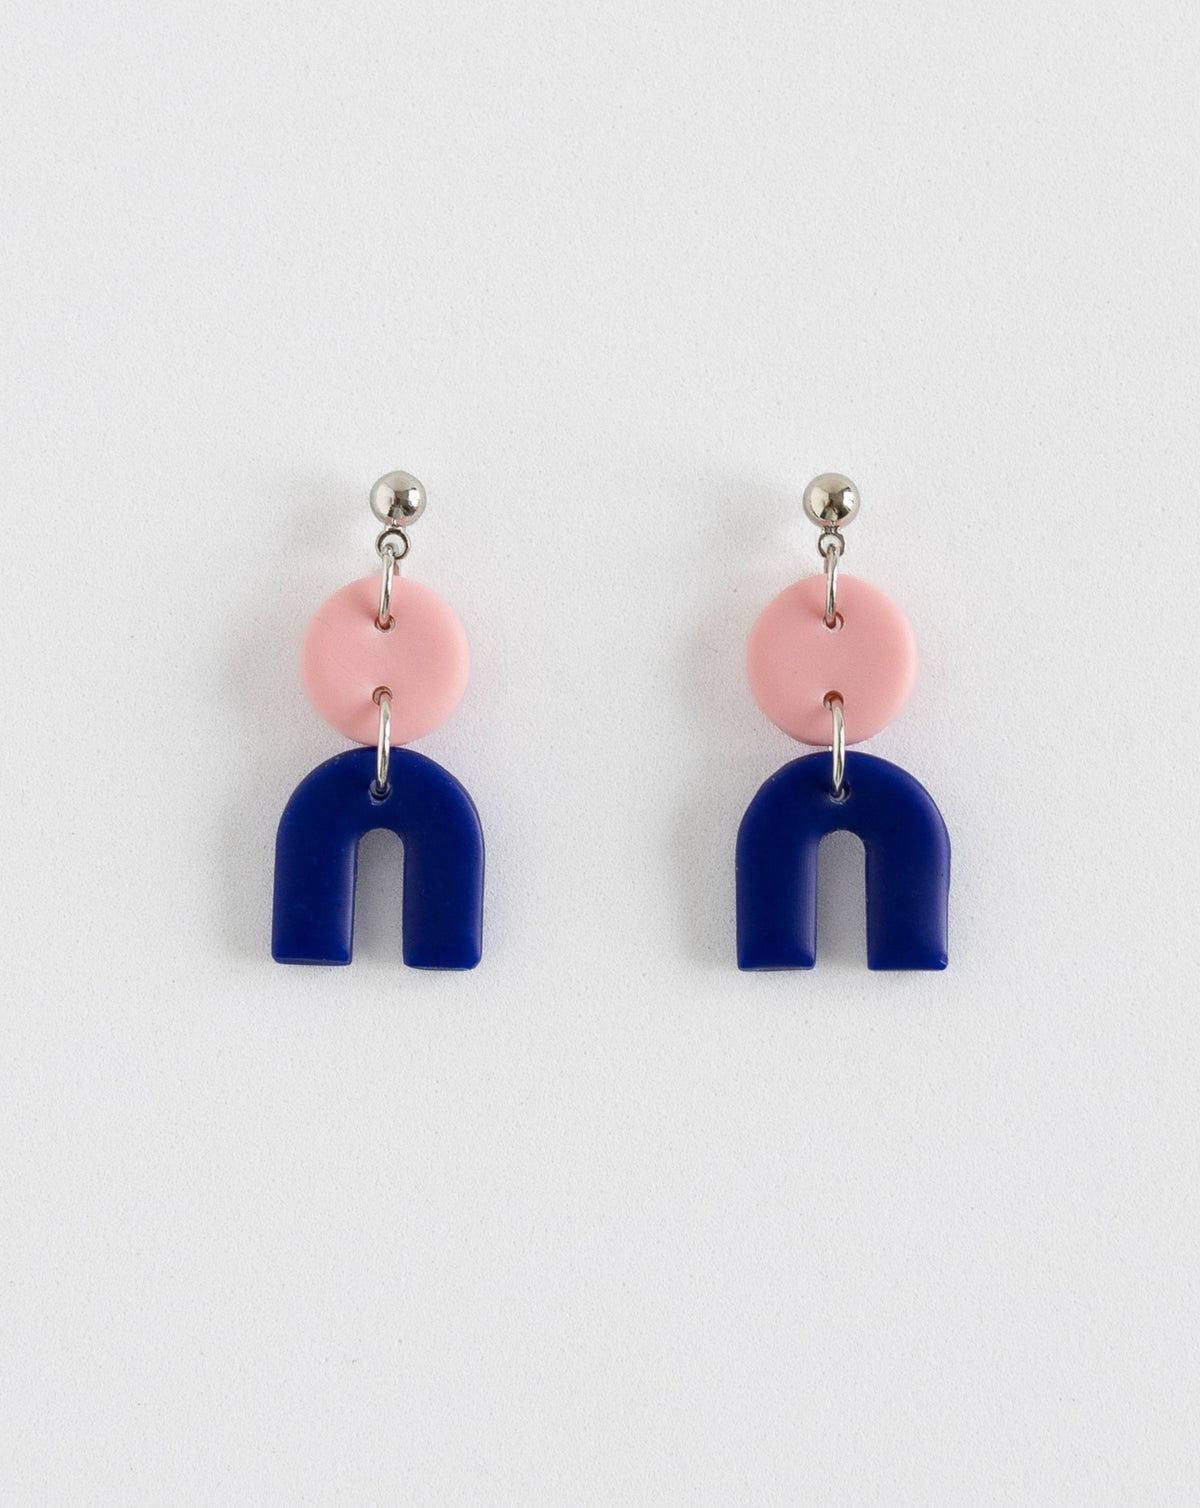 Tiny Arch earrings in two part of Sof pink and Hue Blue polymer clay parts with silver Ball studs, front view.